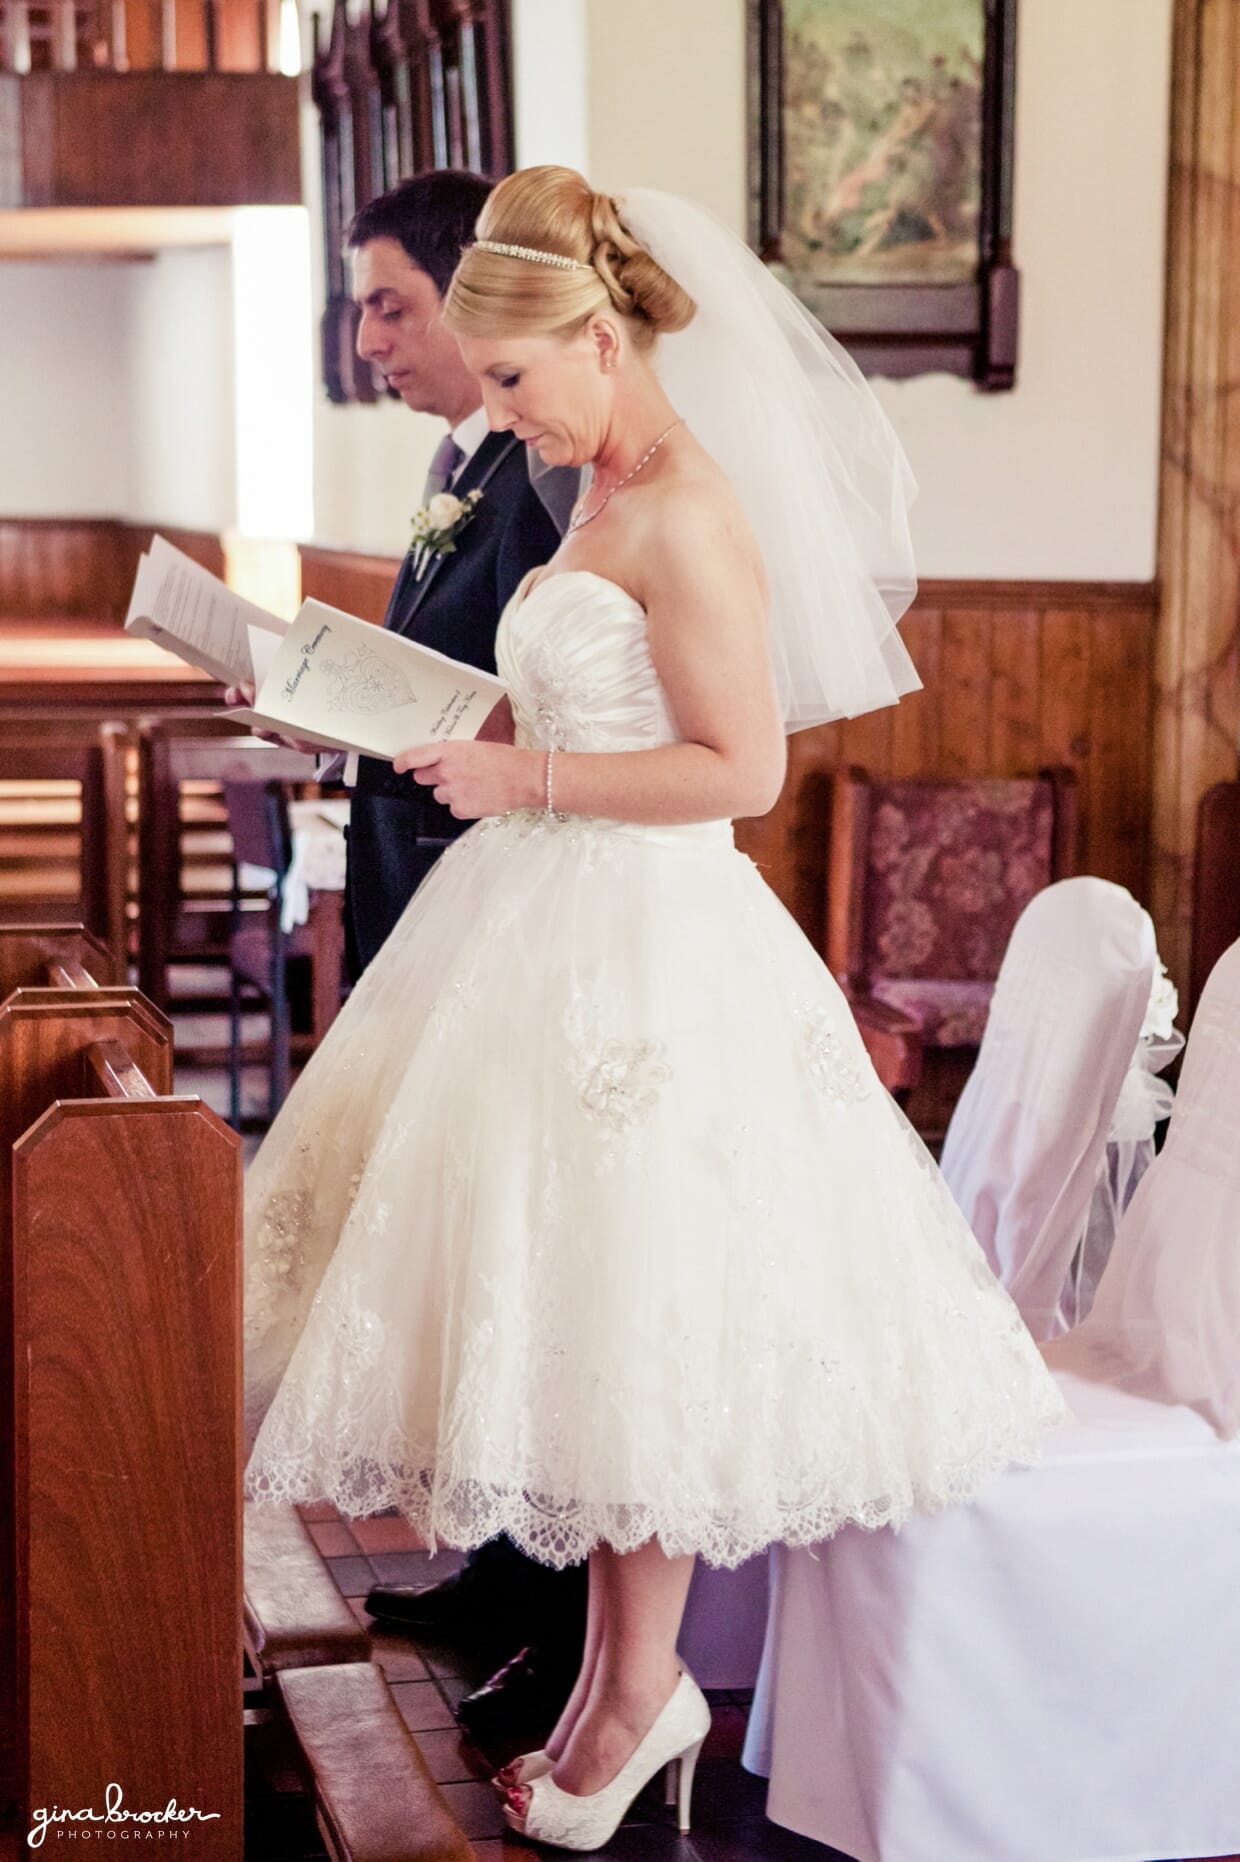 The bride and groom read a prayer together during their intimate and sweet wedding ceremony